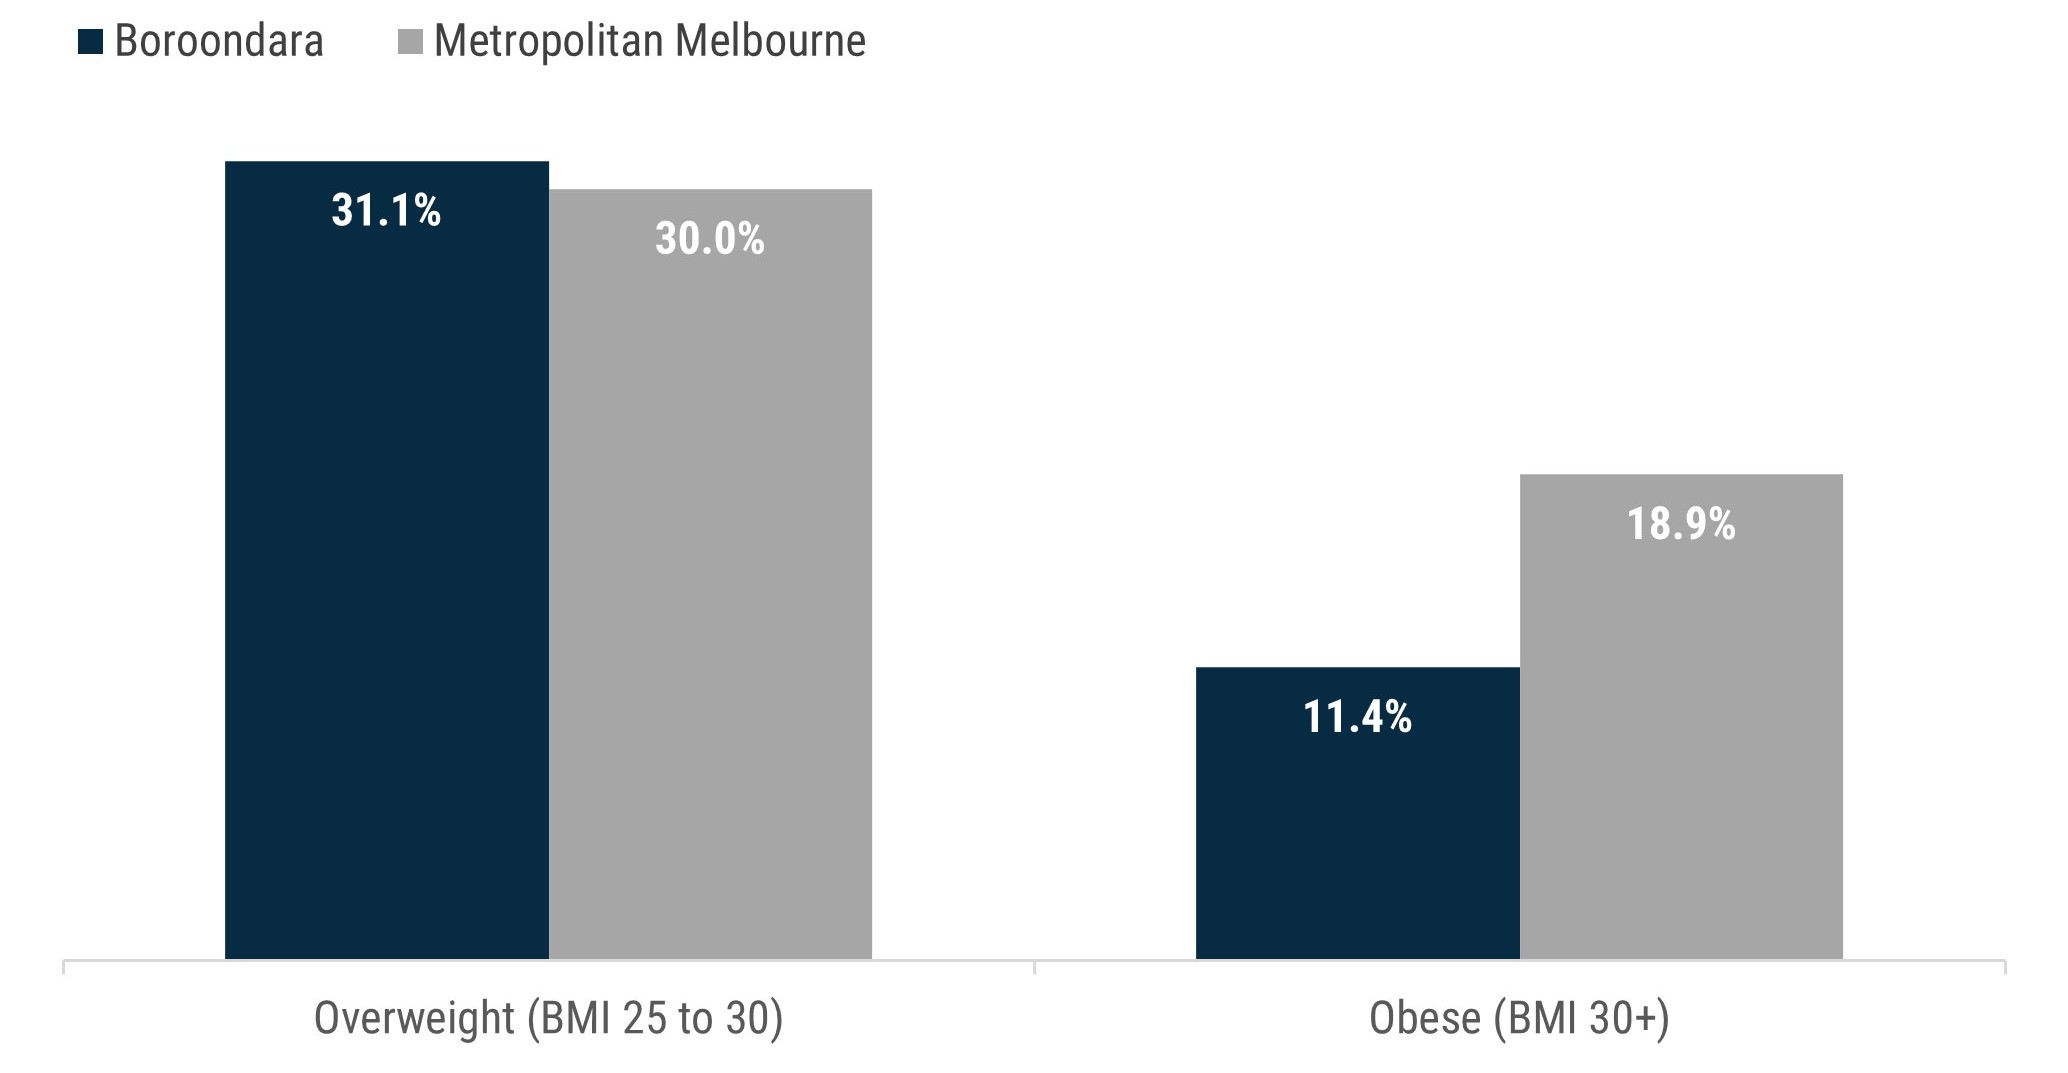 Column chart which shows 31.1% of Boroondara adults are overweight and 11.4% are obese, based on self-reported BMI. By comparison, 30% of  metropolitan Melbourne adults are overweight and 18.9% are obese.